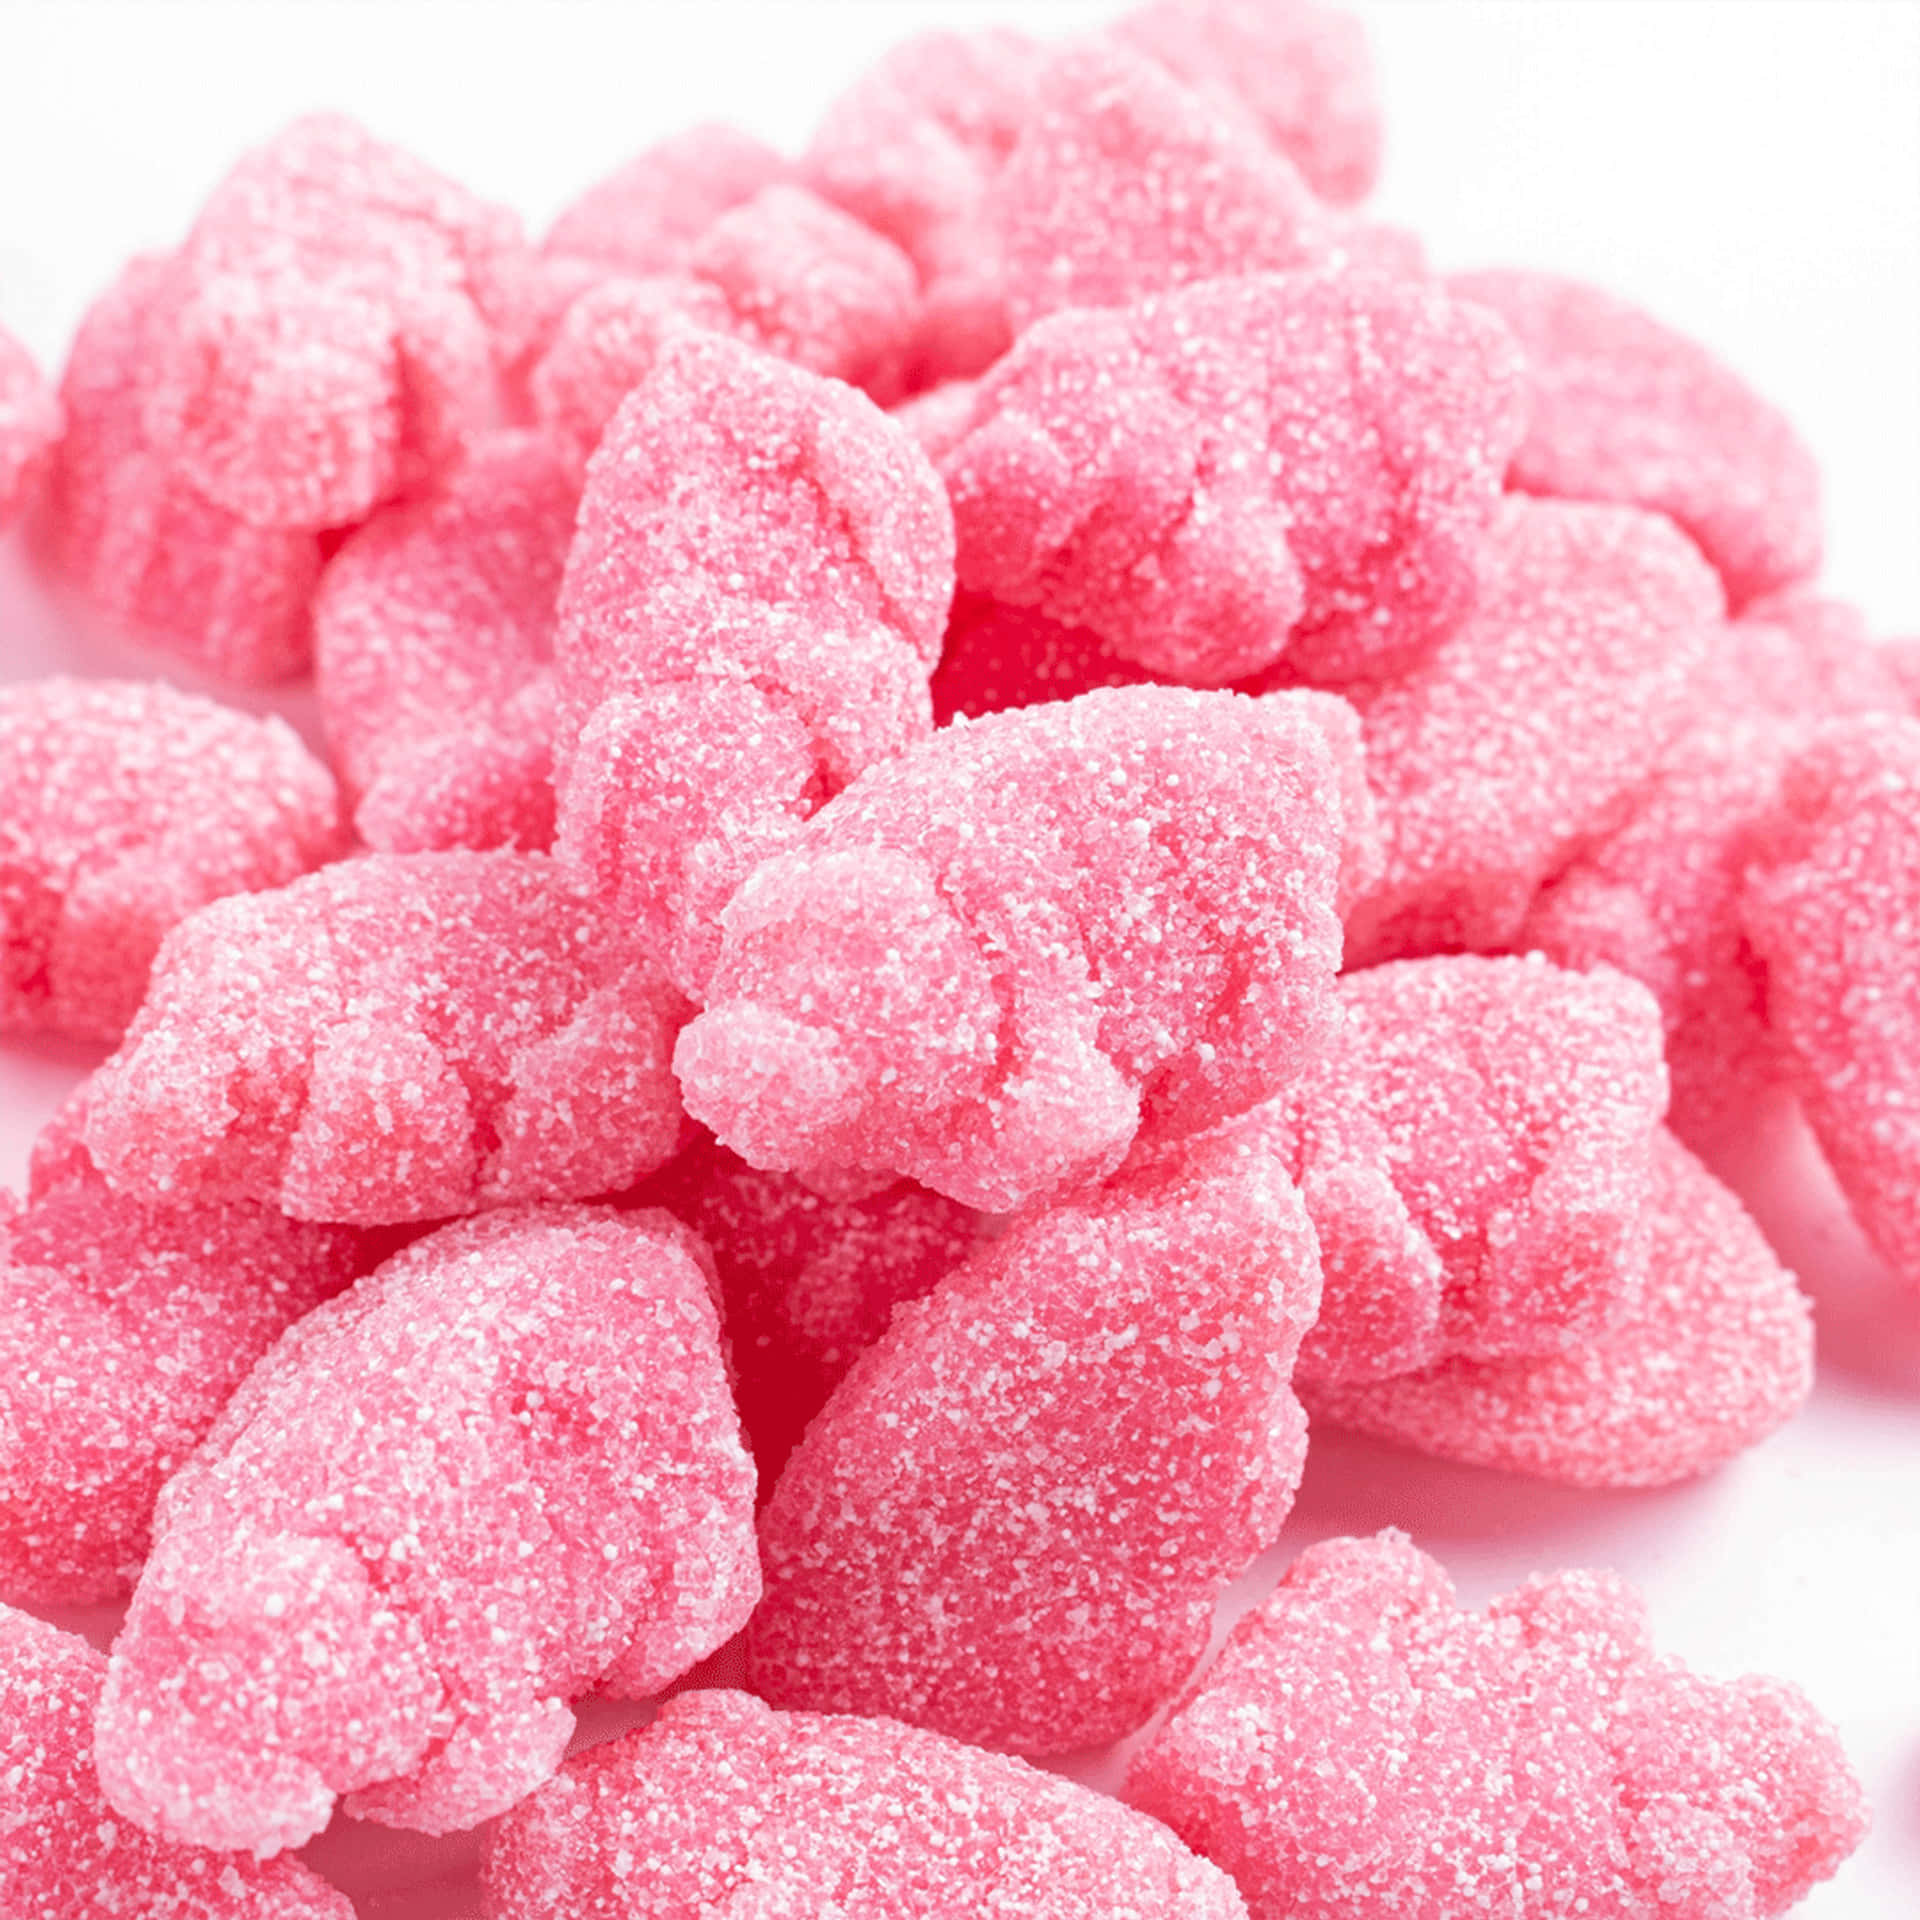 Pink Candy Delight Wallpaper